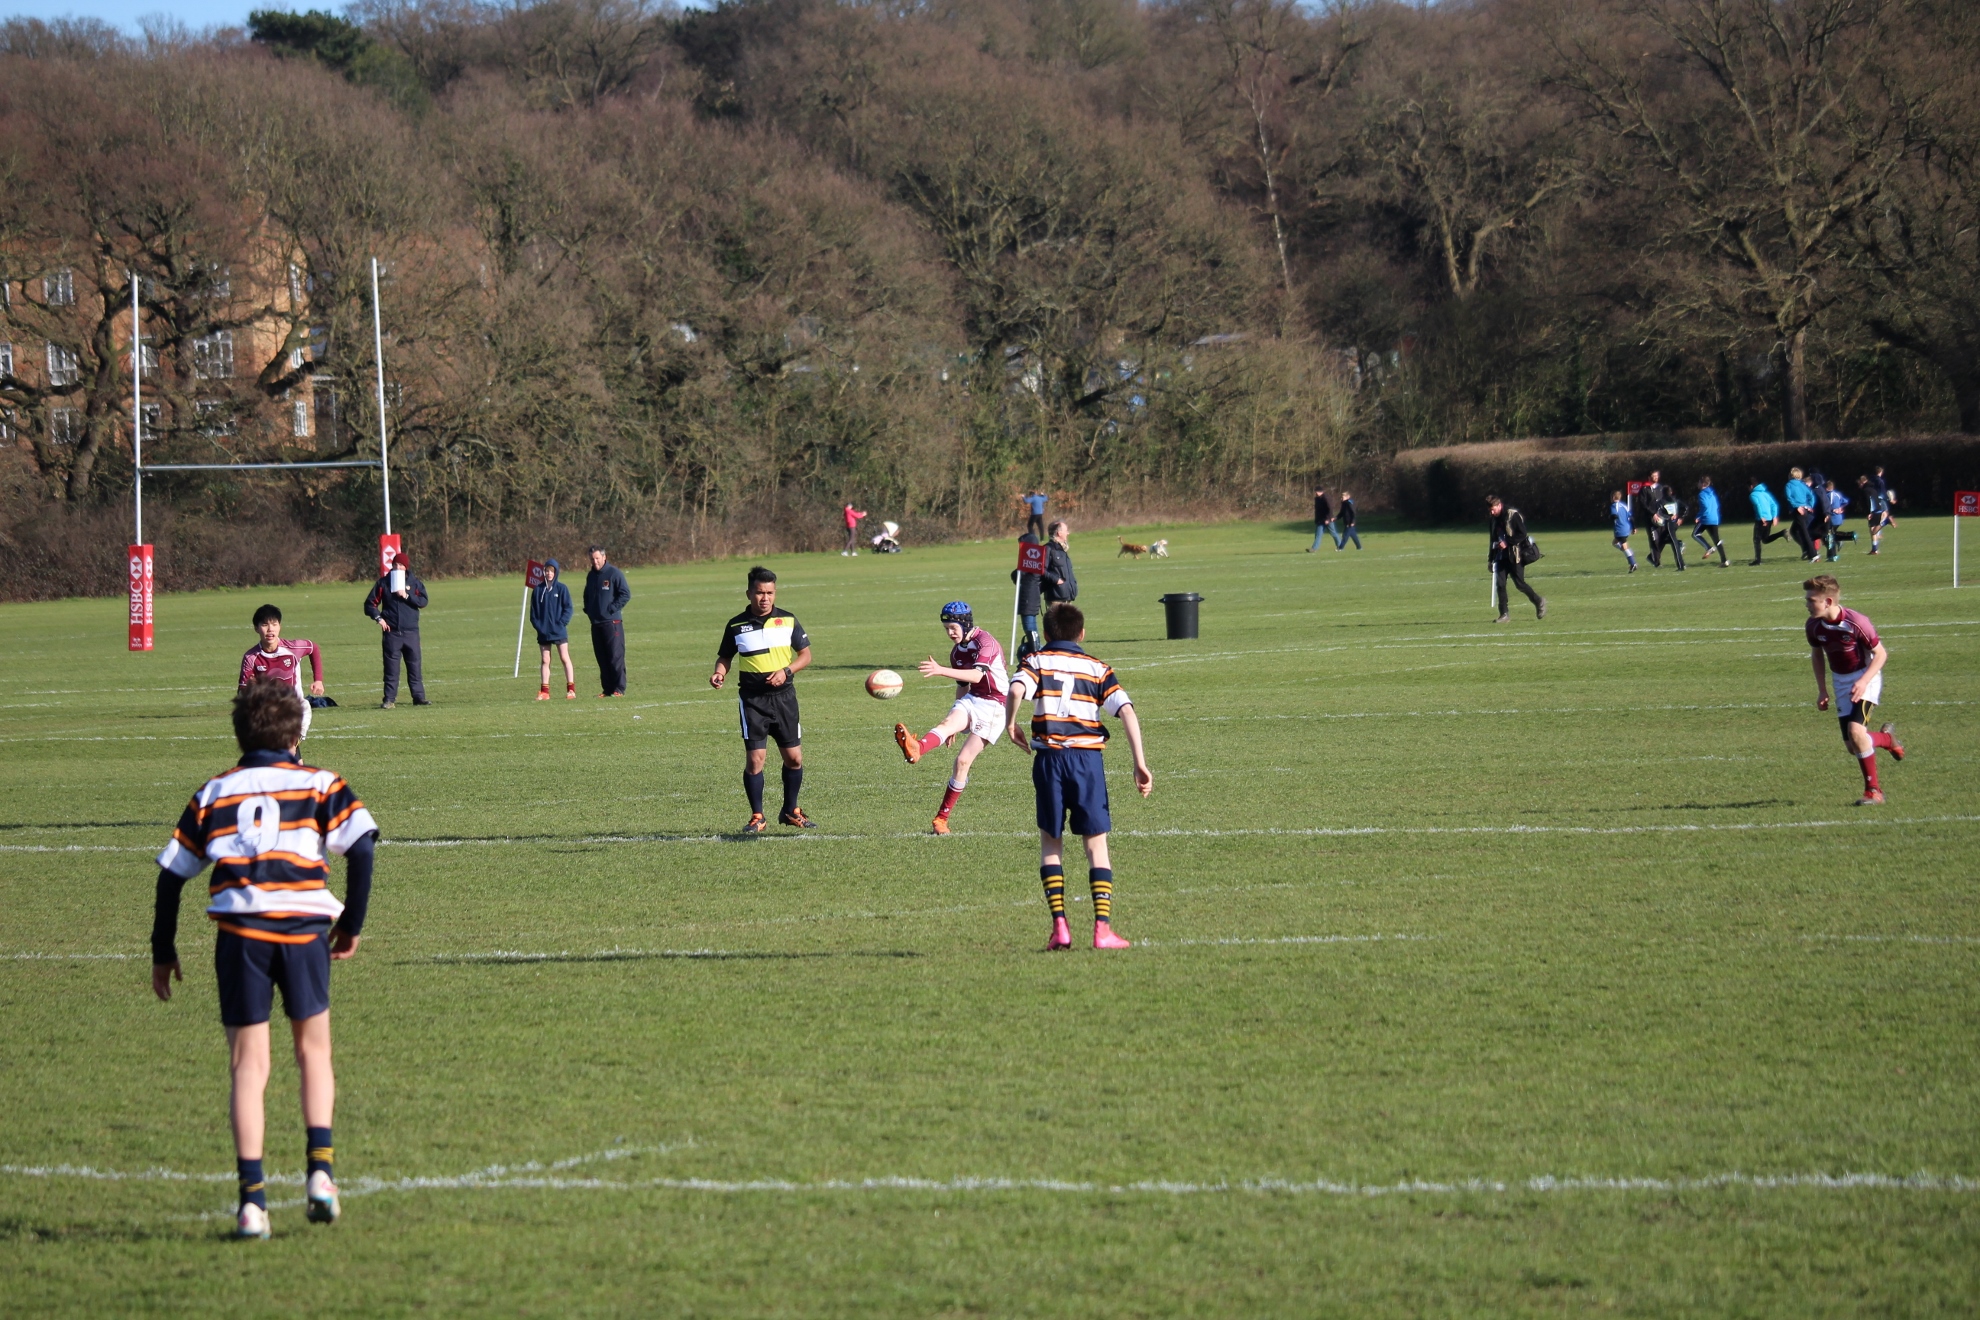 U13s at Rosslyn Park 7s Tournament, March 2016 (Runners-Up)